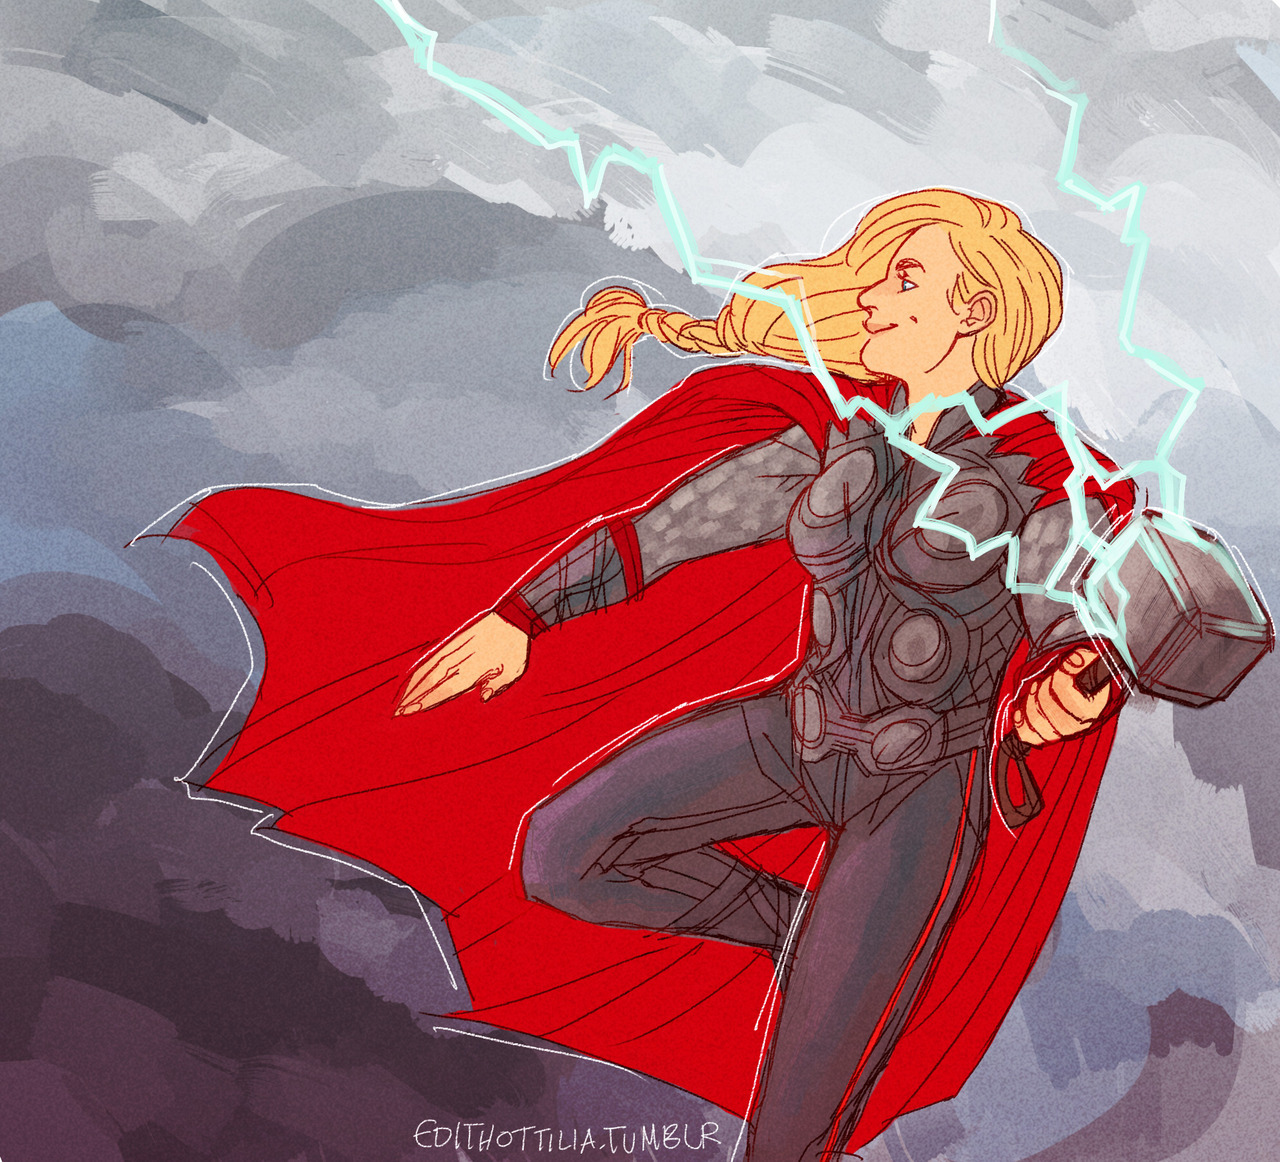 edithottilia:  sigh I just really love Fem!Thor so here have this shitty drawing